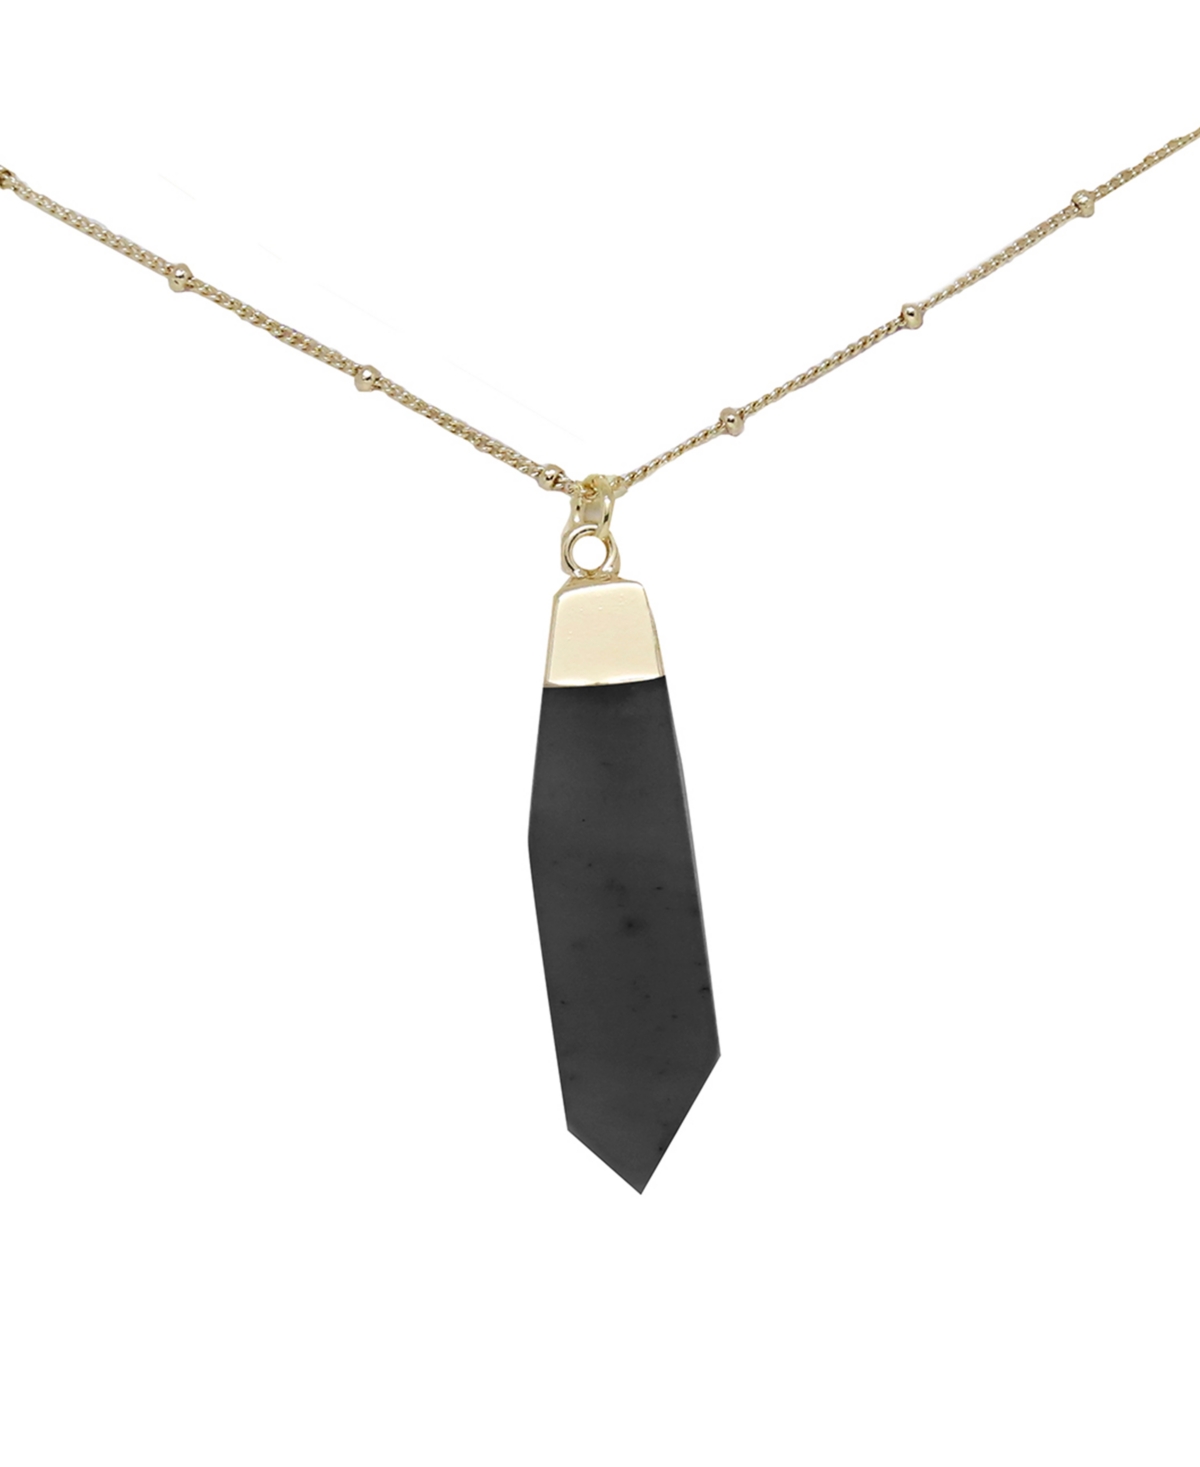 Charged Onyx Pendant Necklace